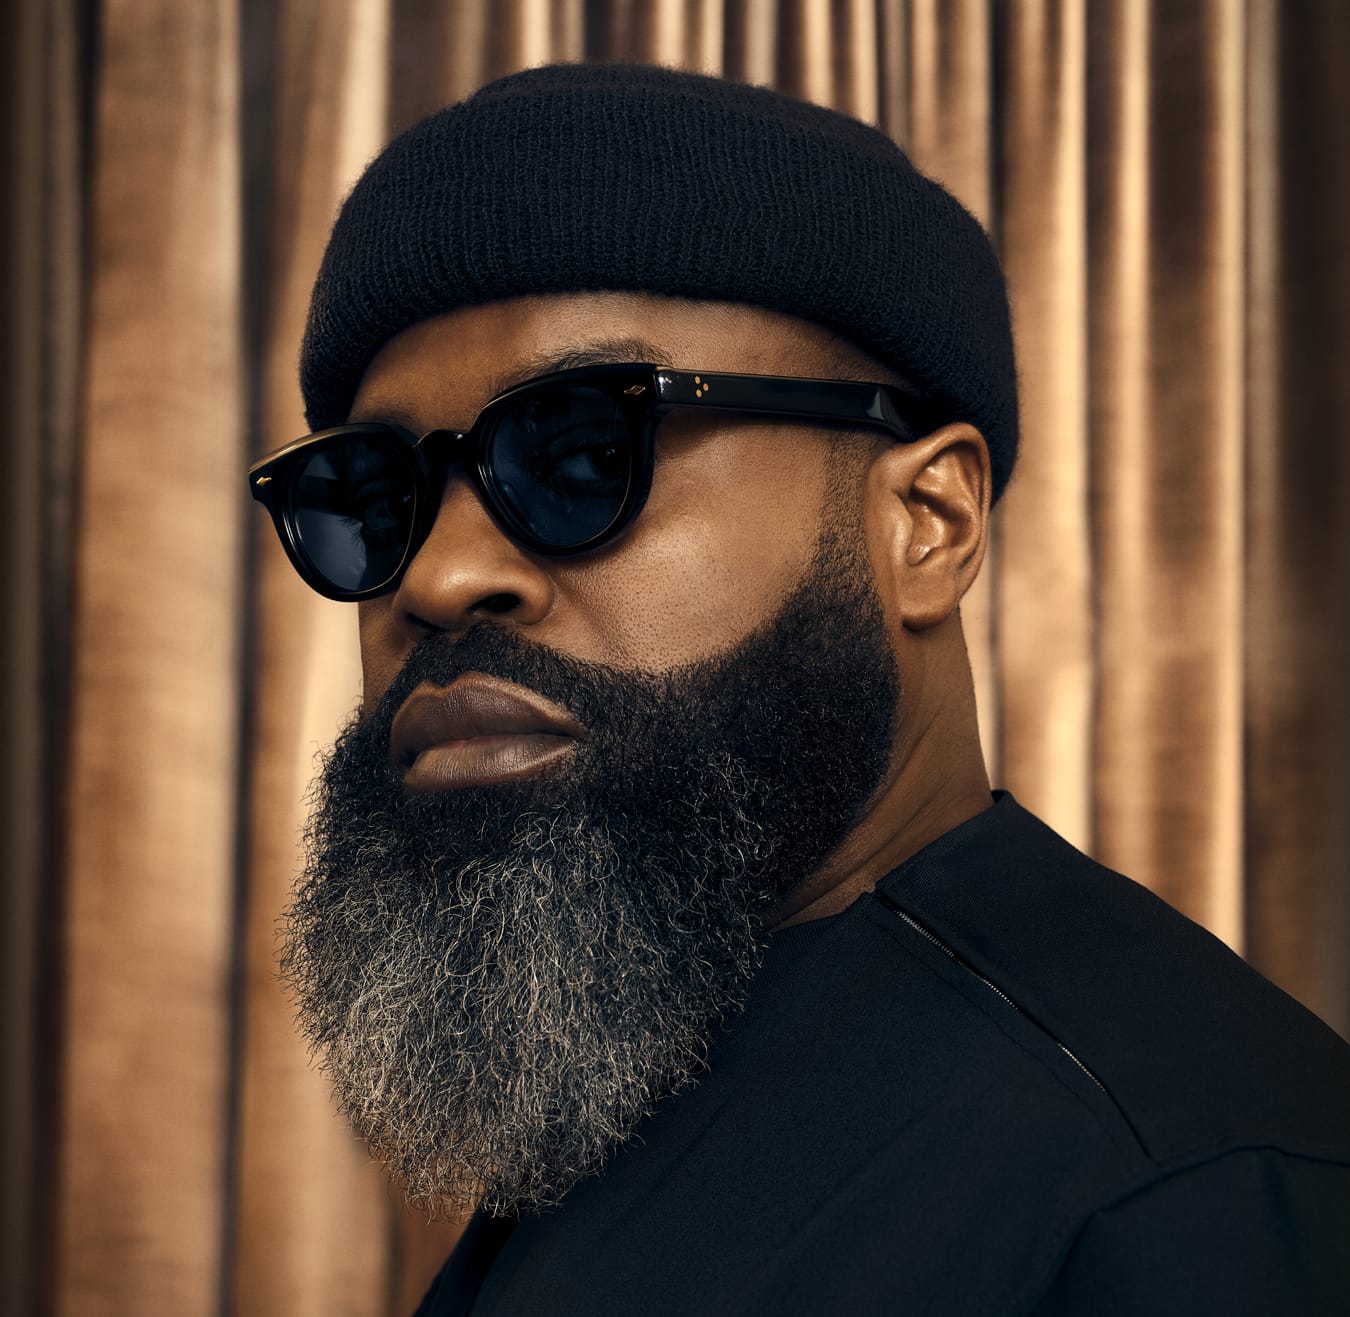 Tariq “Black Thought” Trotter: After The Fire